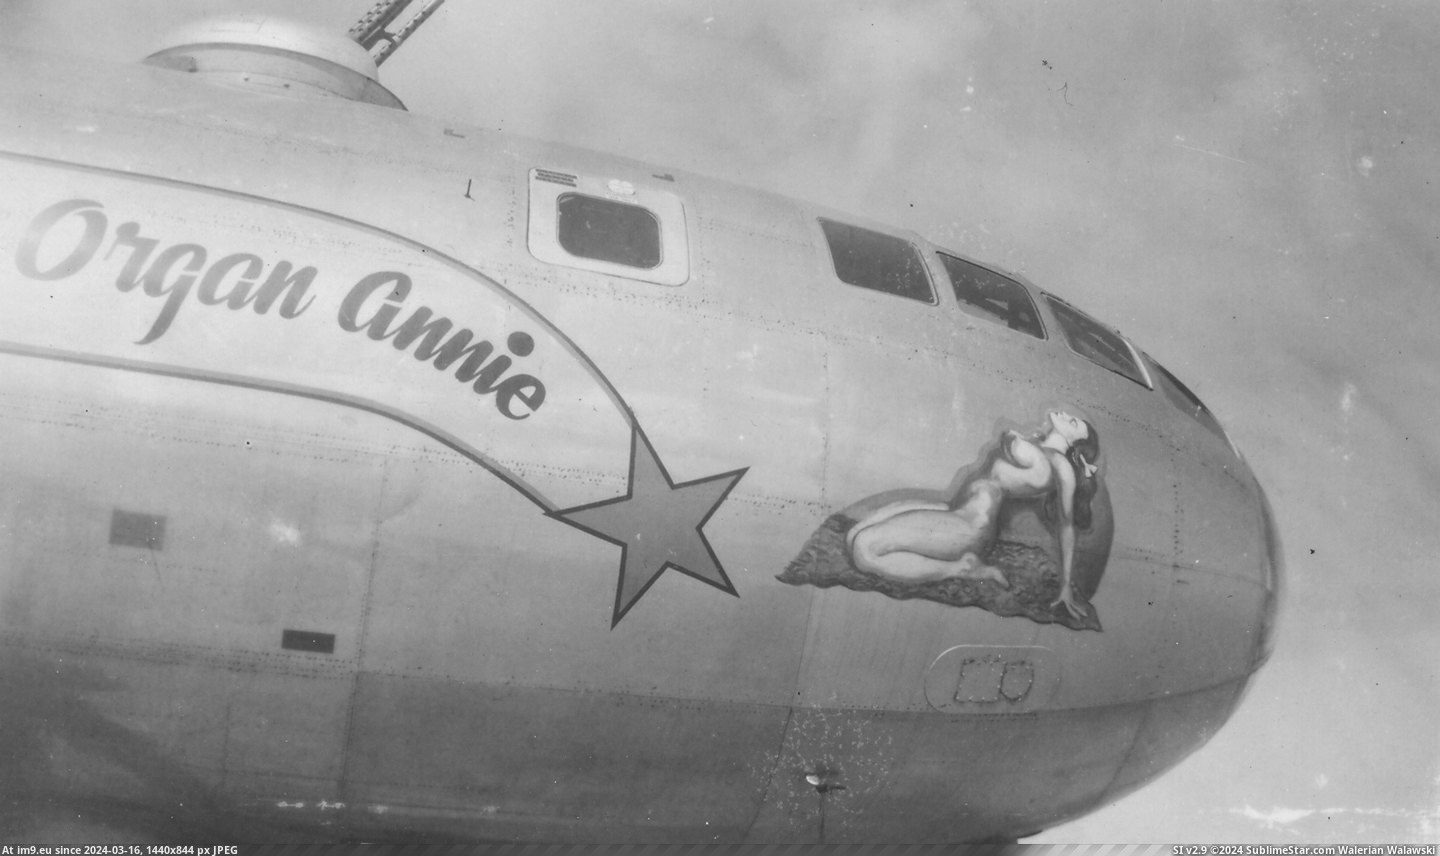 #Art #Posting #Nose #Ww2 #Galore #Guess #Grandfather [Pics] Guess I can get away with posting my Grandfather's pictures from WW2 today. Nose art galore. 26 Pic. (Image of album My r/PICS favs))